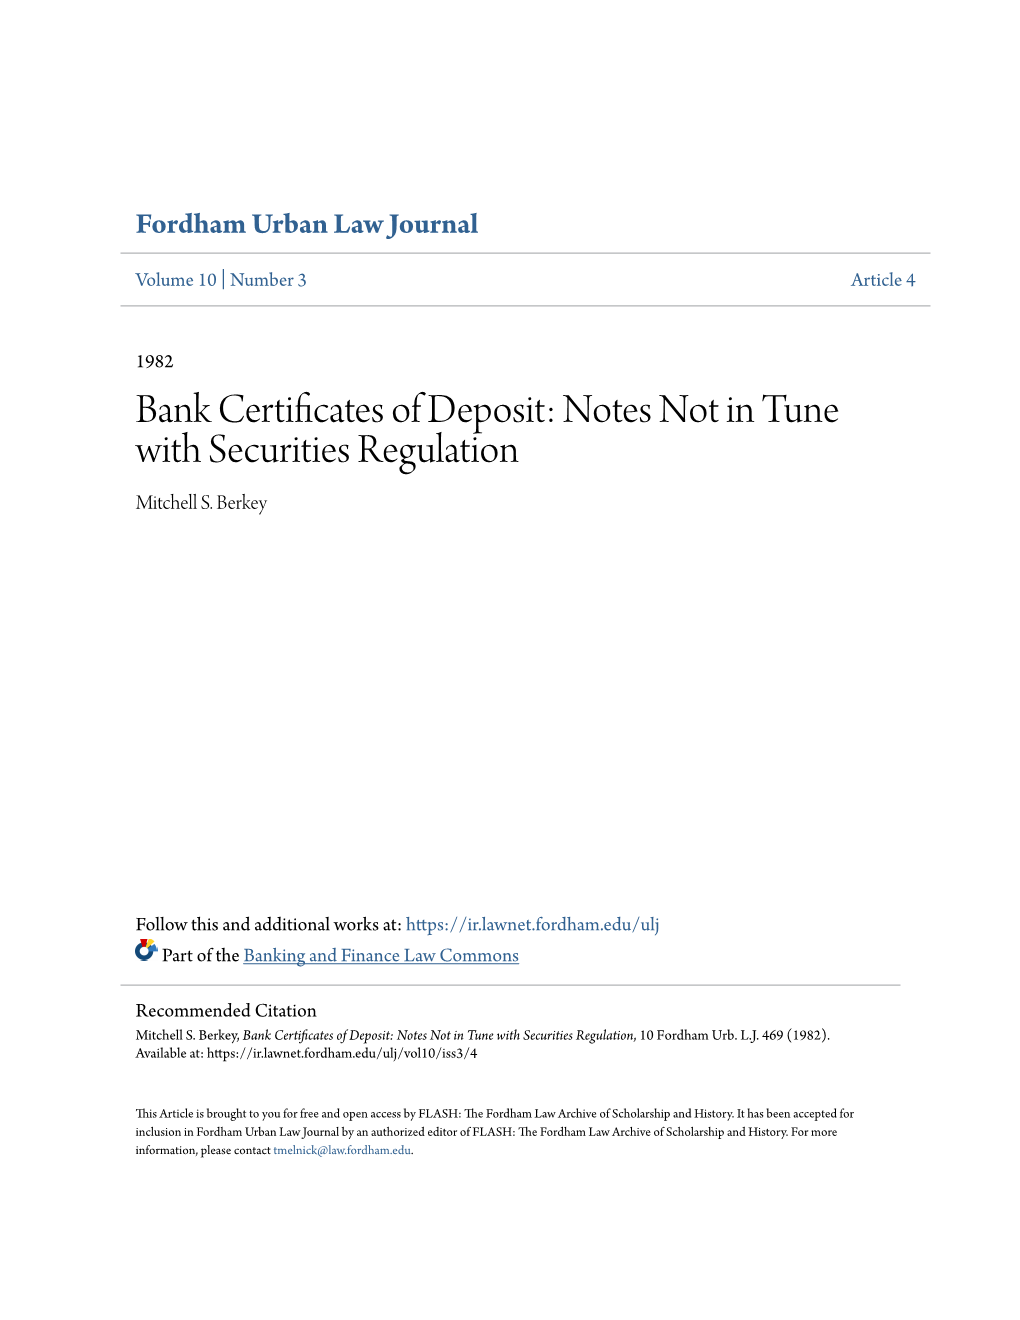 Bank Certificates of Deposit: Notes Not in Tune with Securities Regulation Mitchell S